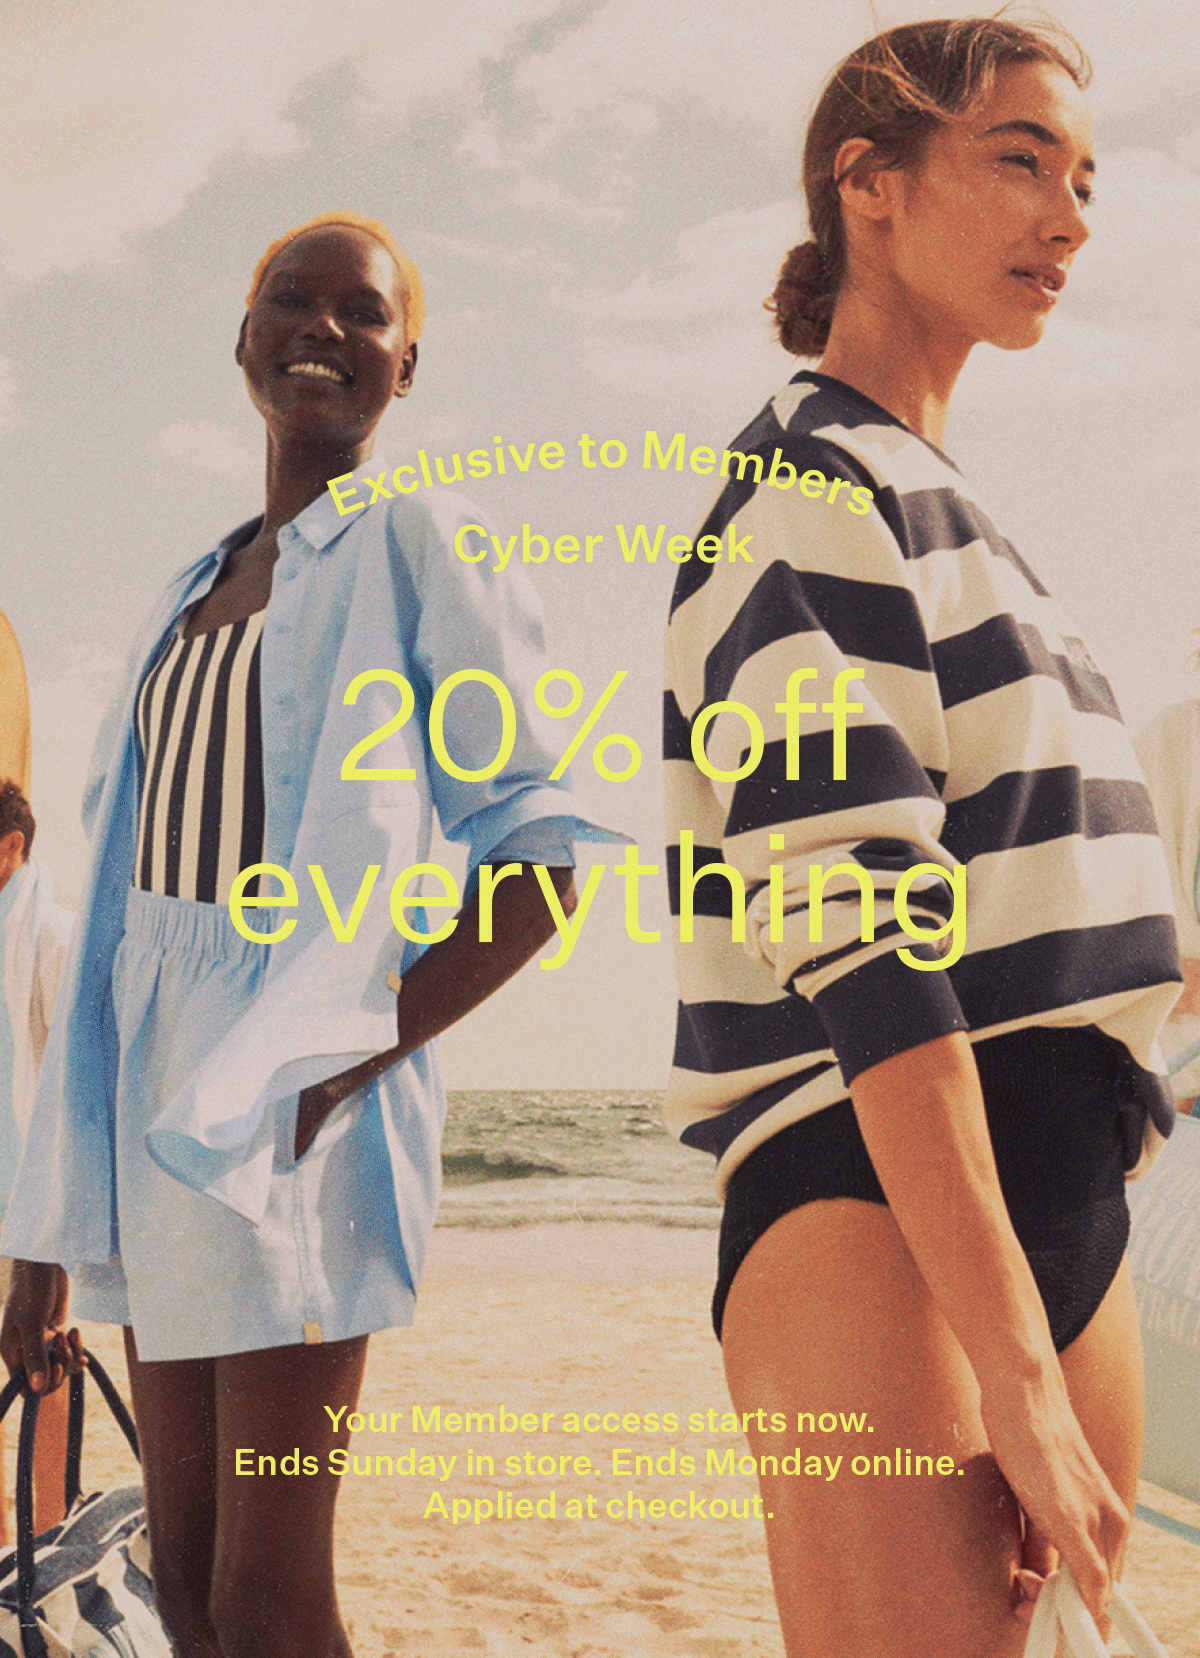 Exclusive to Members | Cyber Week | 20% off everything | Your Member access starts now. Ends Sunday in store. Ends Monday online. Applied at checkout.